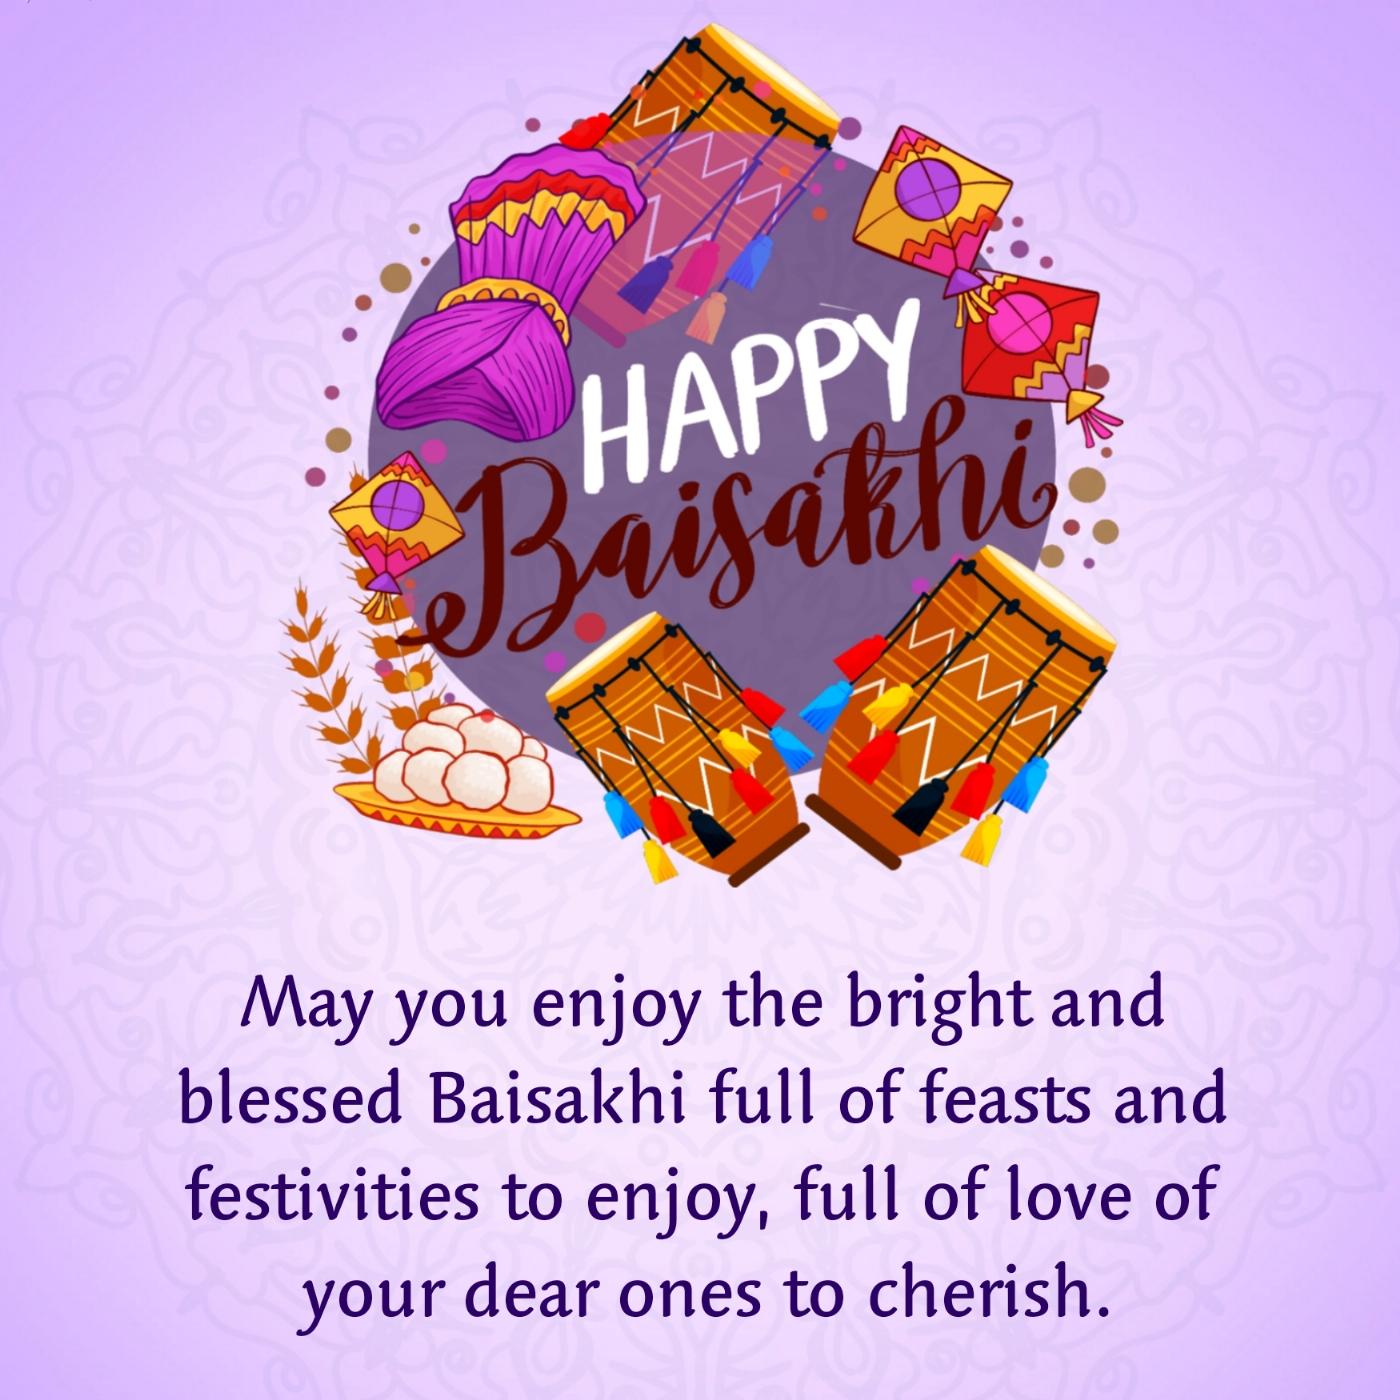 May you enjoy the bright and blessed Baisakhi full of feasts